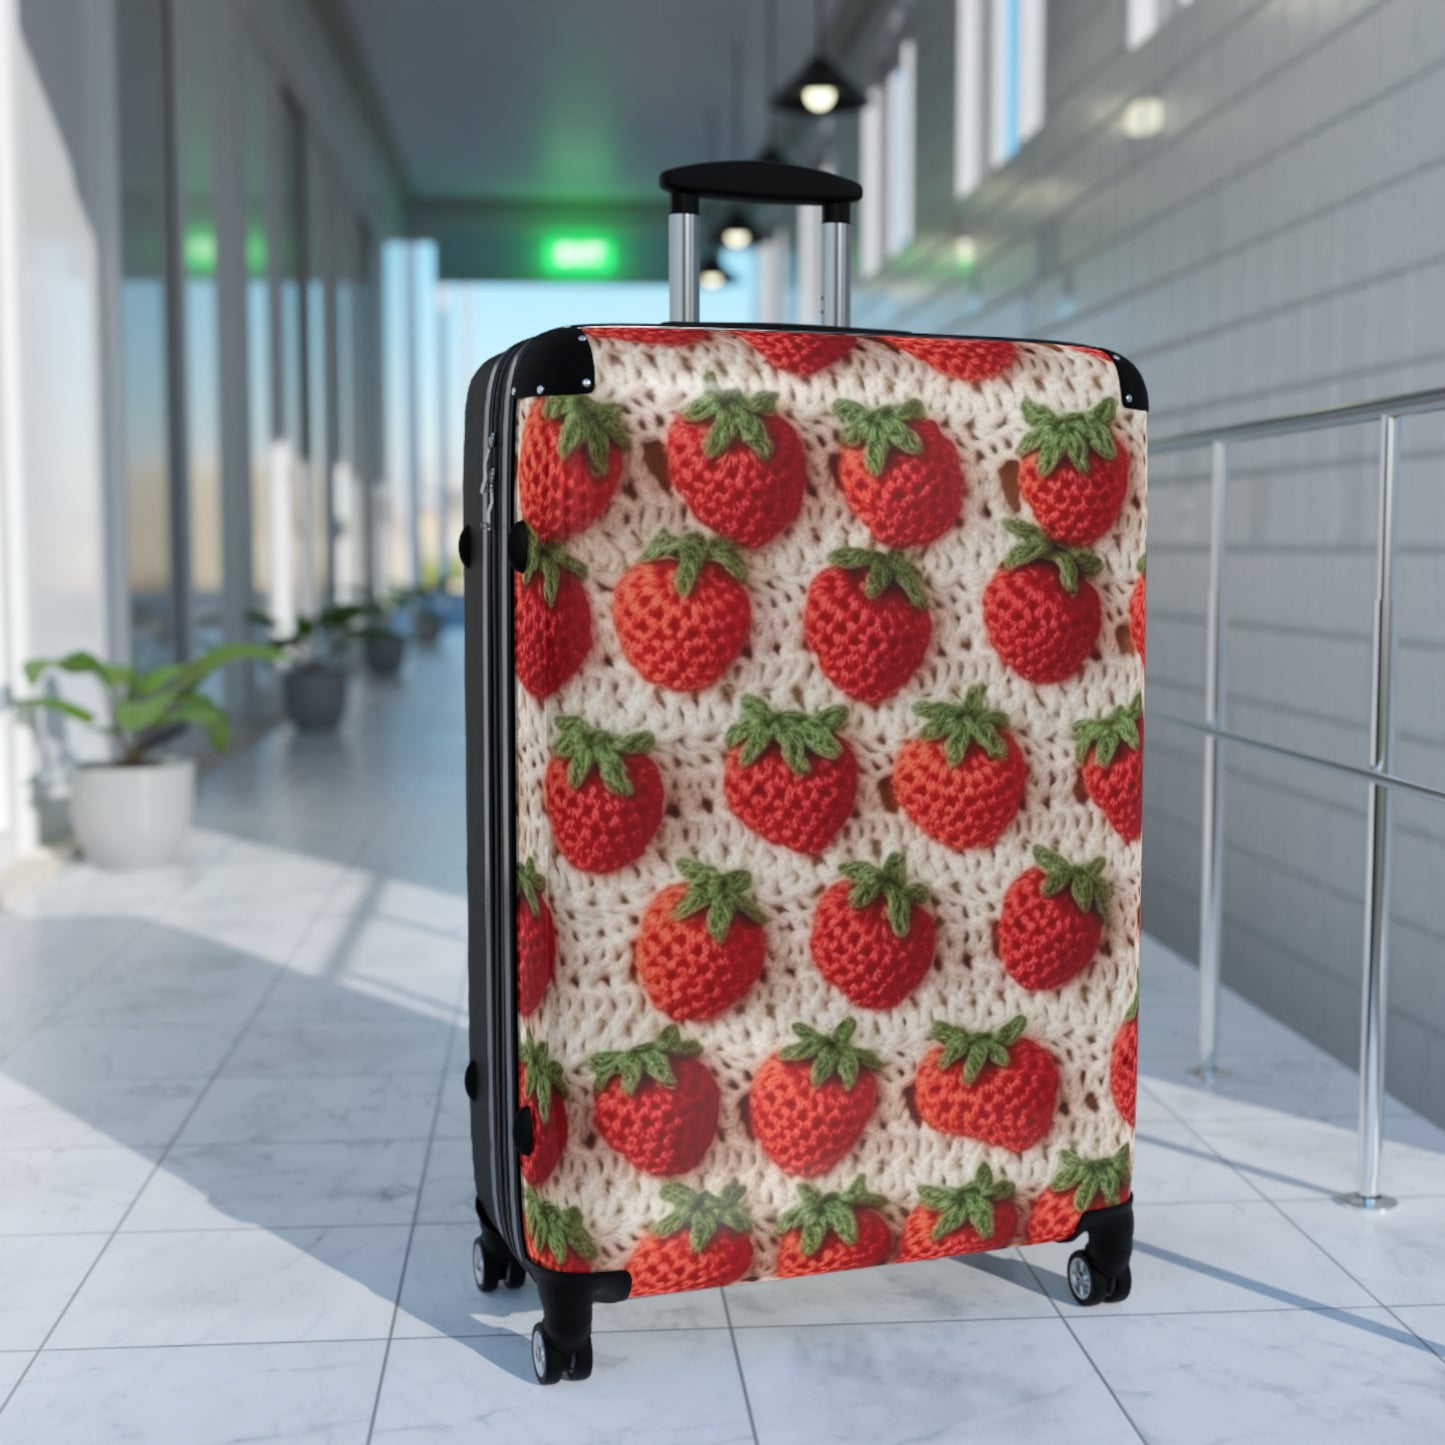 Strawberry Traditional Japanese, Crochet Craft, Fruit Design, Red Berry Pattern - Suitcase